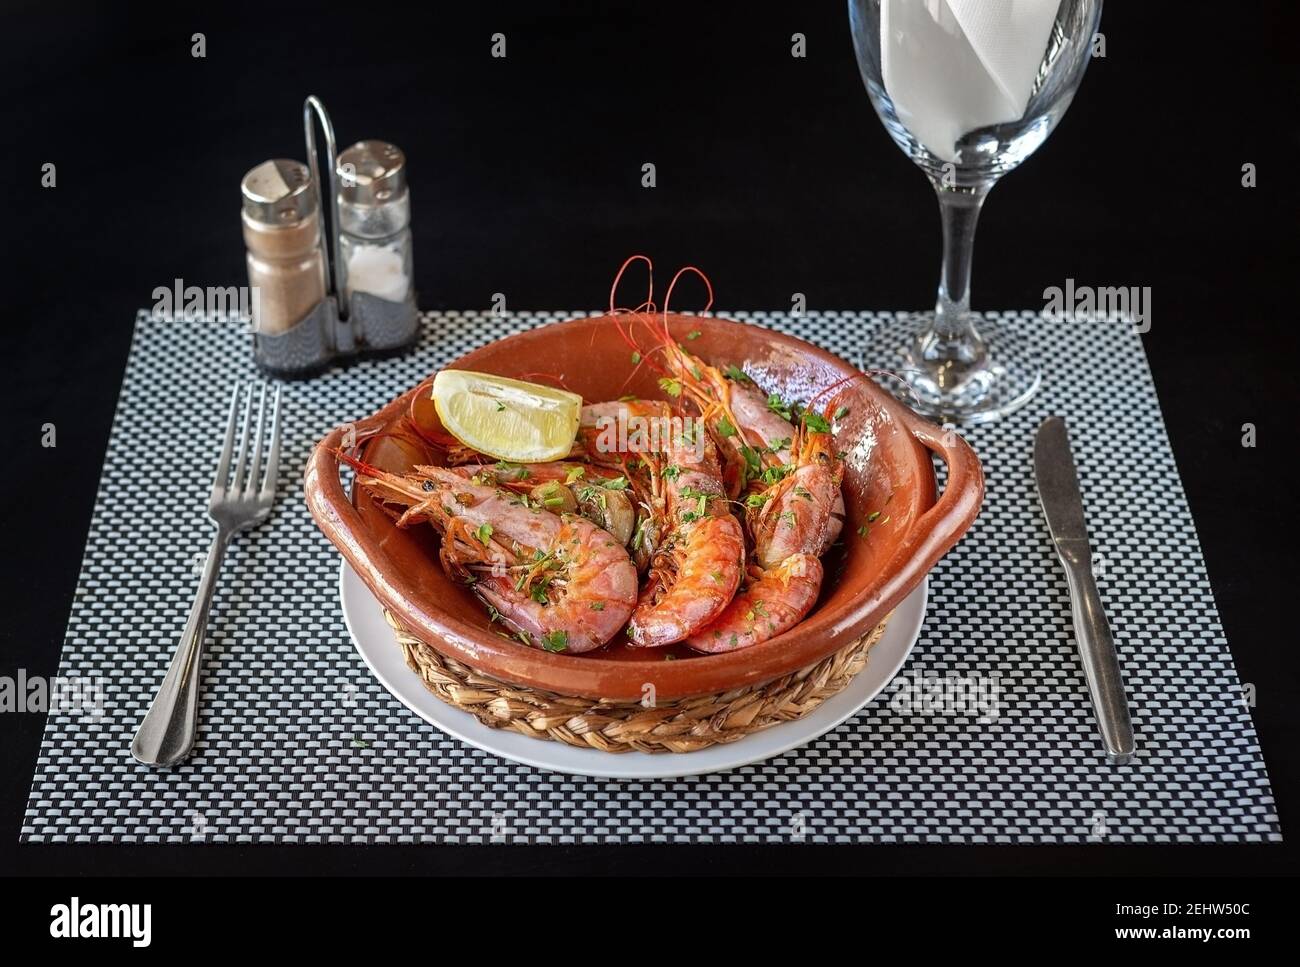 Cooked shrimp inside a clay bowl, cutlery on the sides and a glass of water. Composition of a meal ready to be eaten. Stock Photo